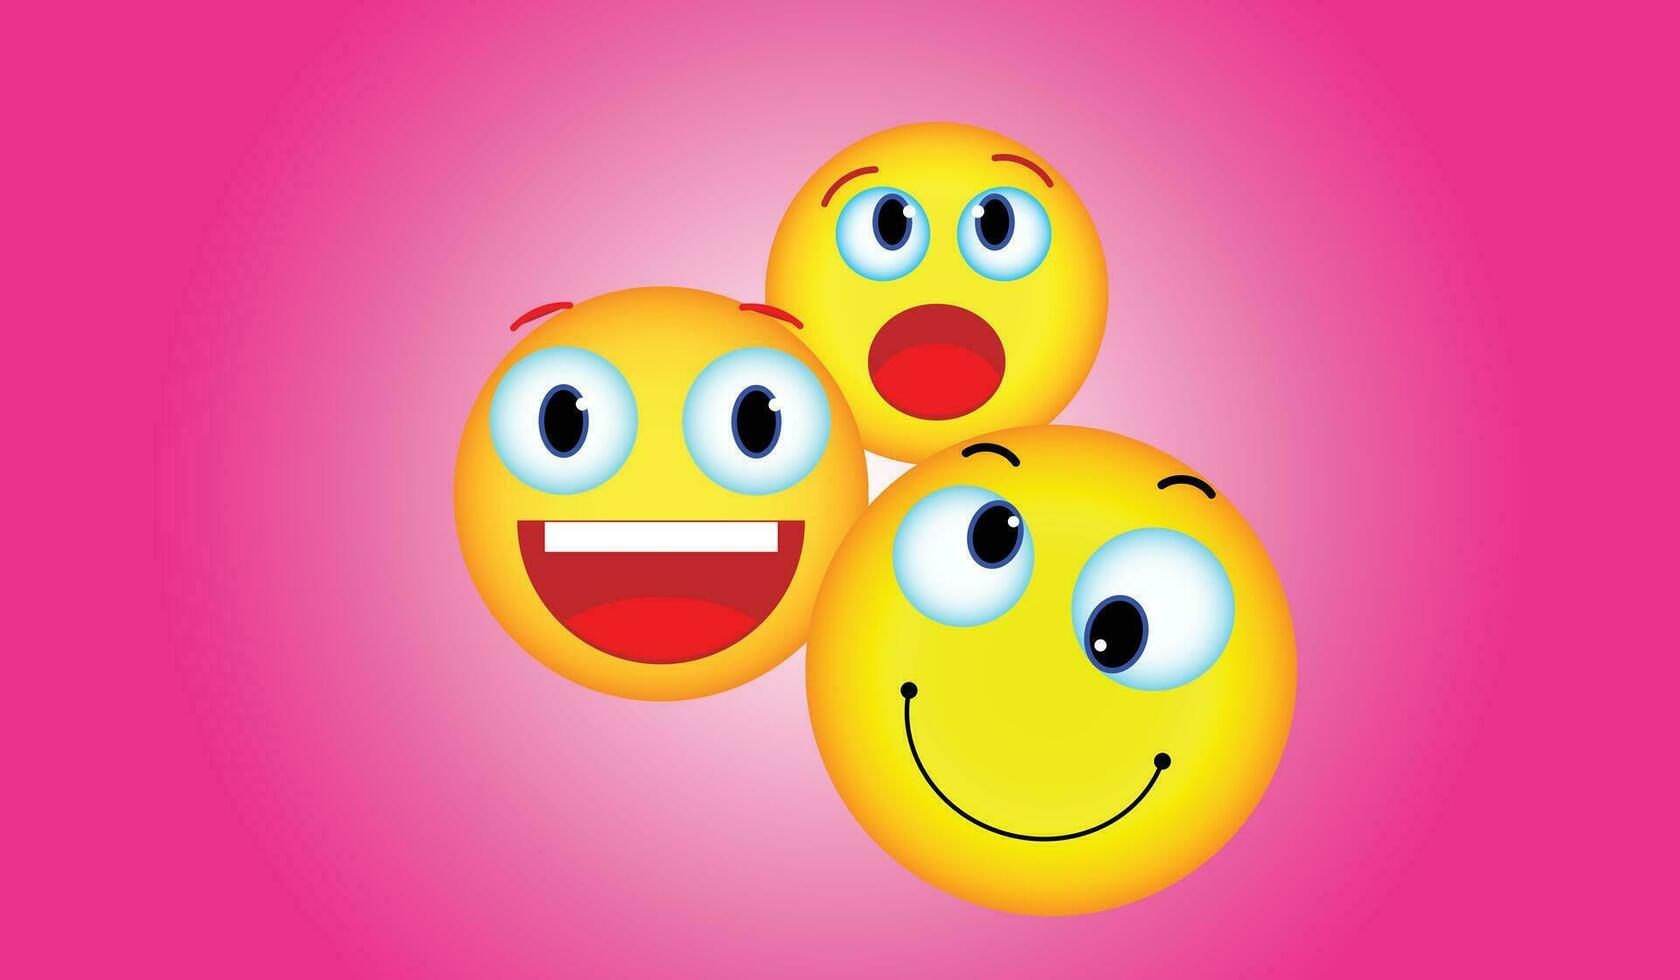 facial expressions in yellow color emoji isolated in pink background. Vector illustration